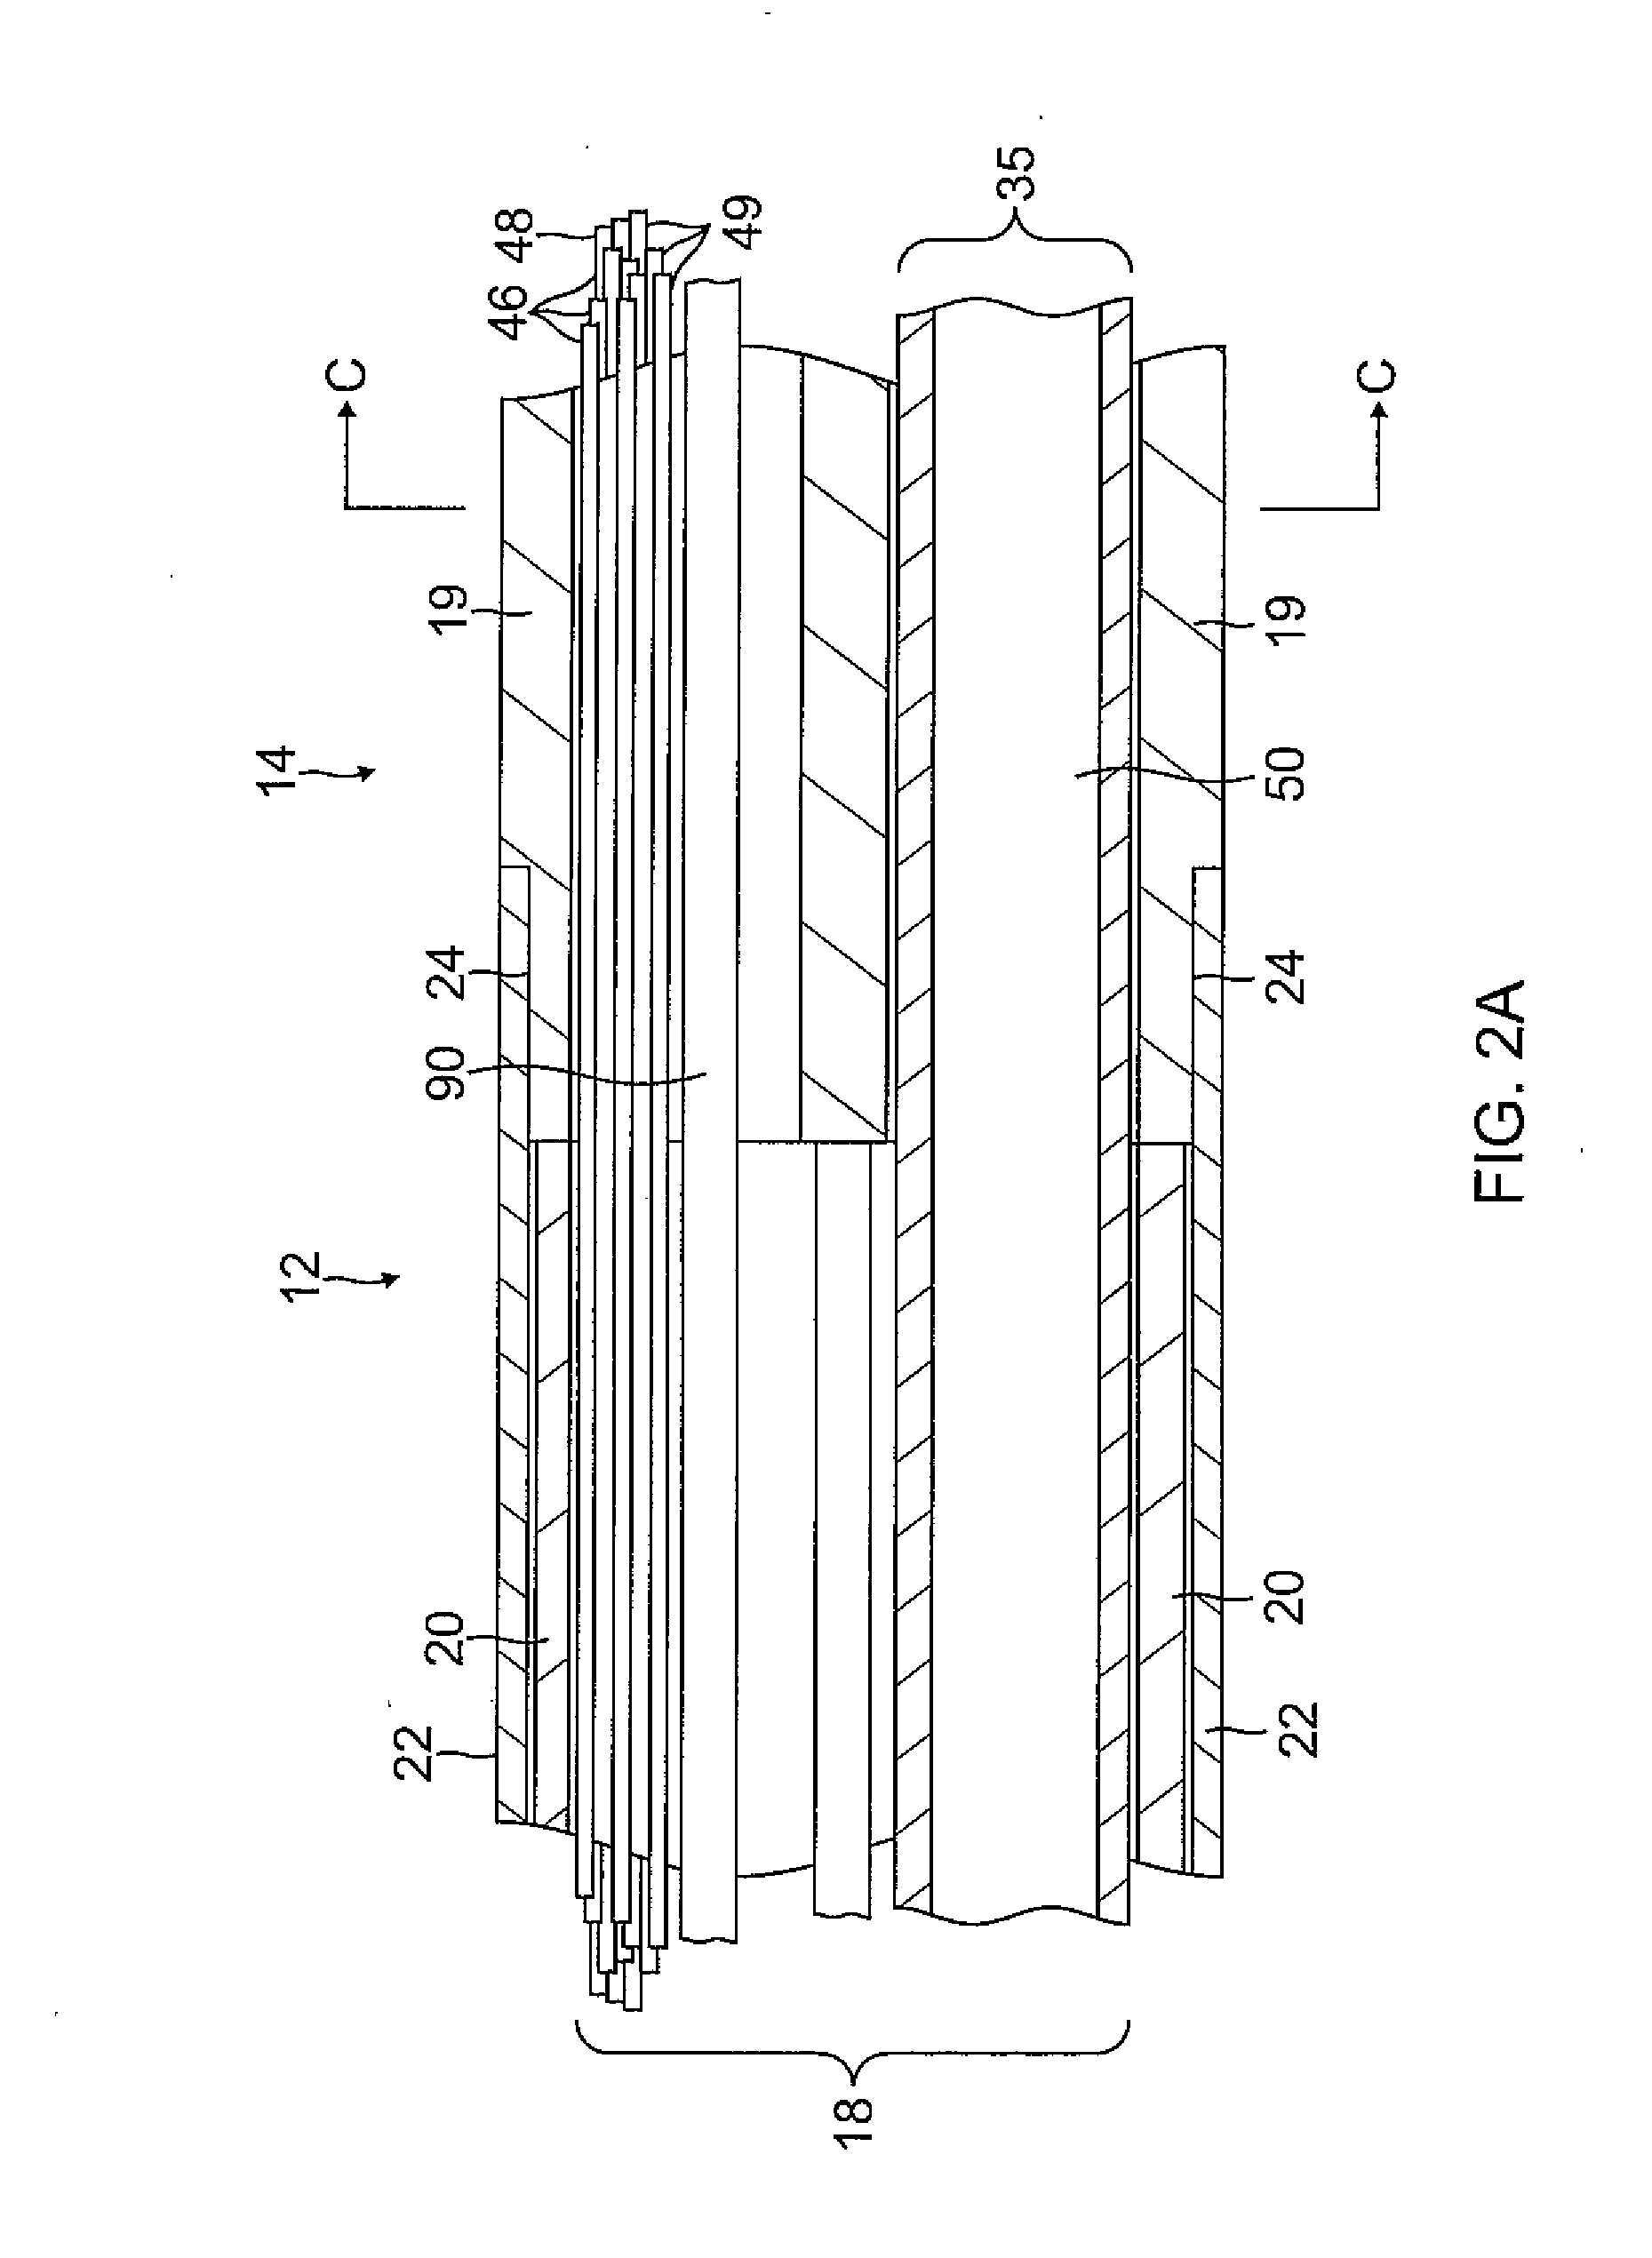 Catheter with irrigated tip electrode with porous substrate and high density surface micro-electrodes